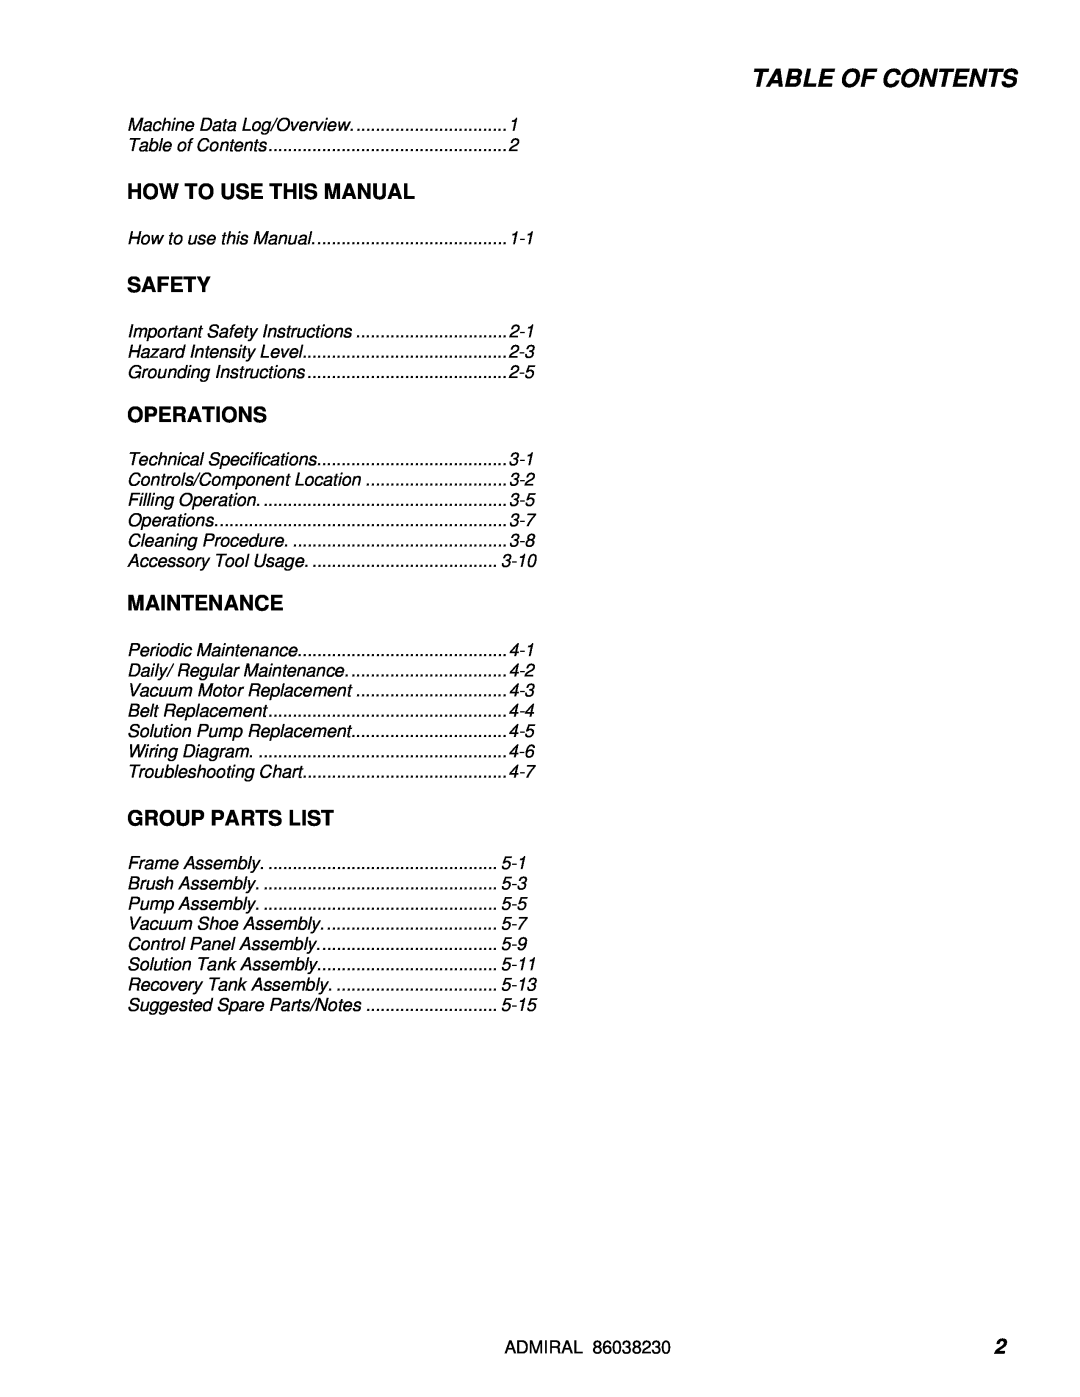 Windsor ADM8 10080170 manual Table Of Contents, How To Use This Manual, Safety, Operations, Maintenance, Group Parts List 